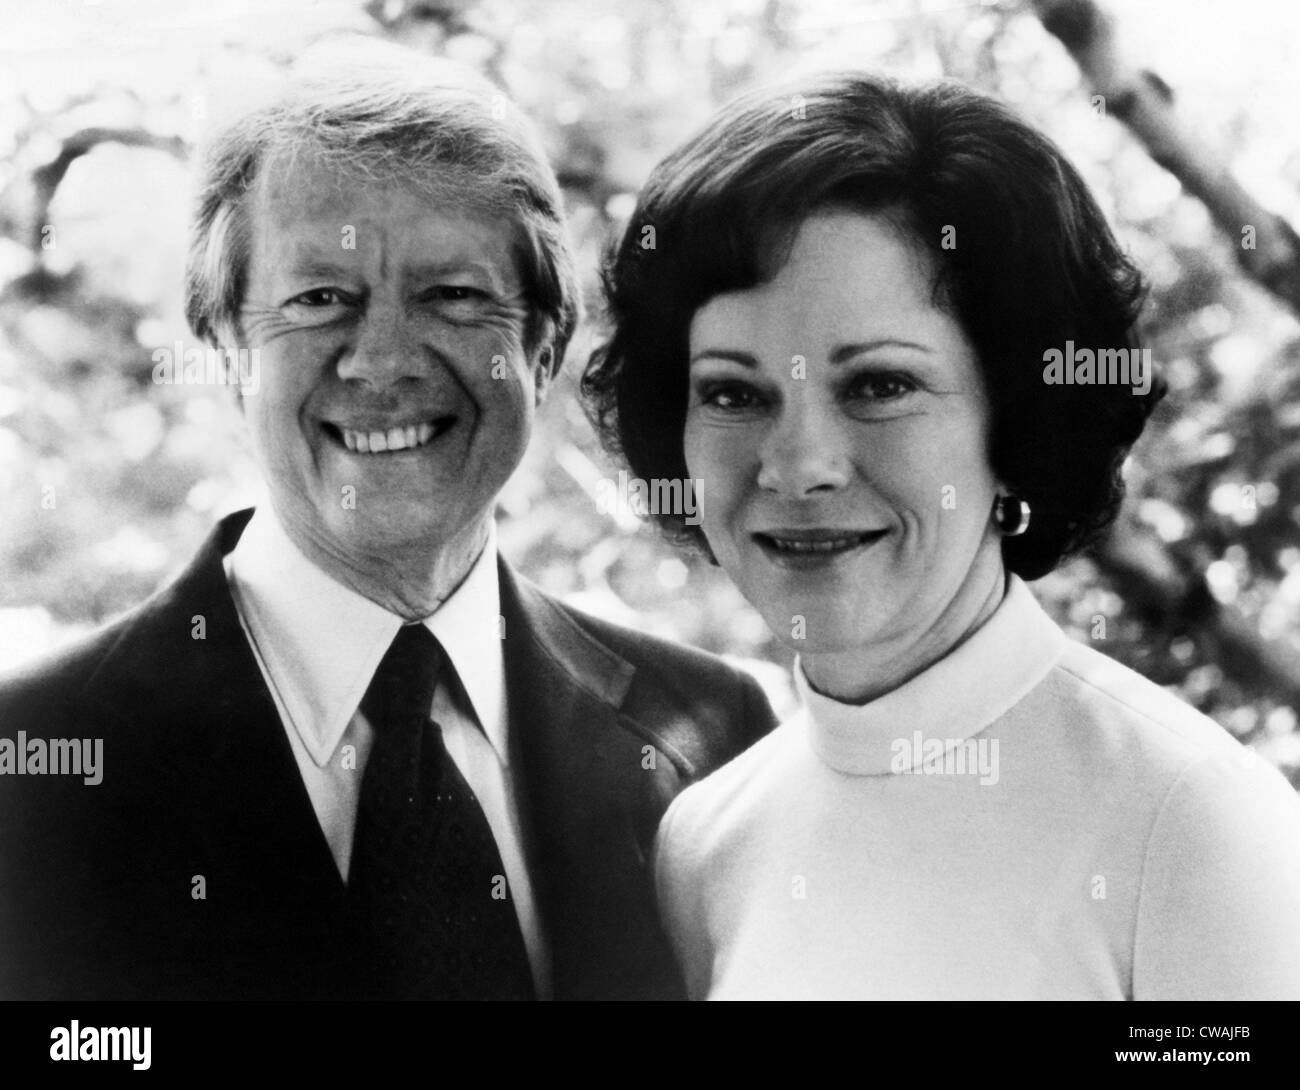 Jimmy Carter and Rosalynn Carter, 1977. Courtesy: CSU Archives/Everett Collection Stock Photo